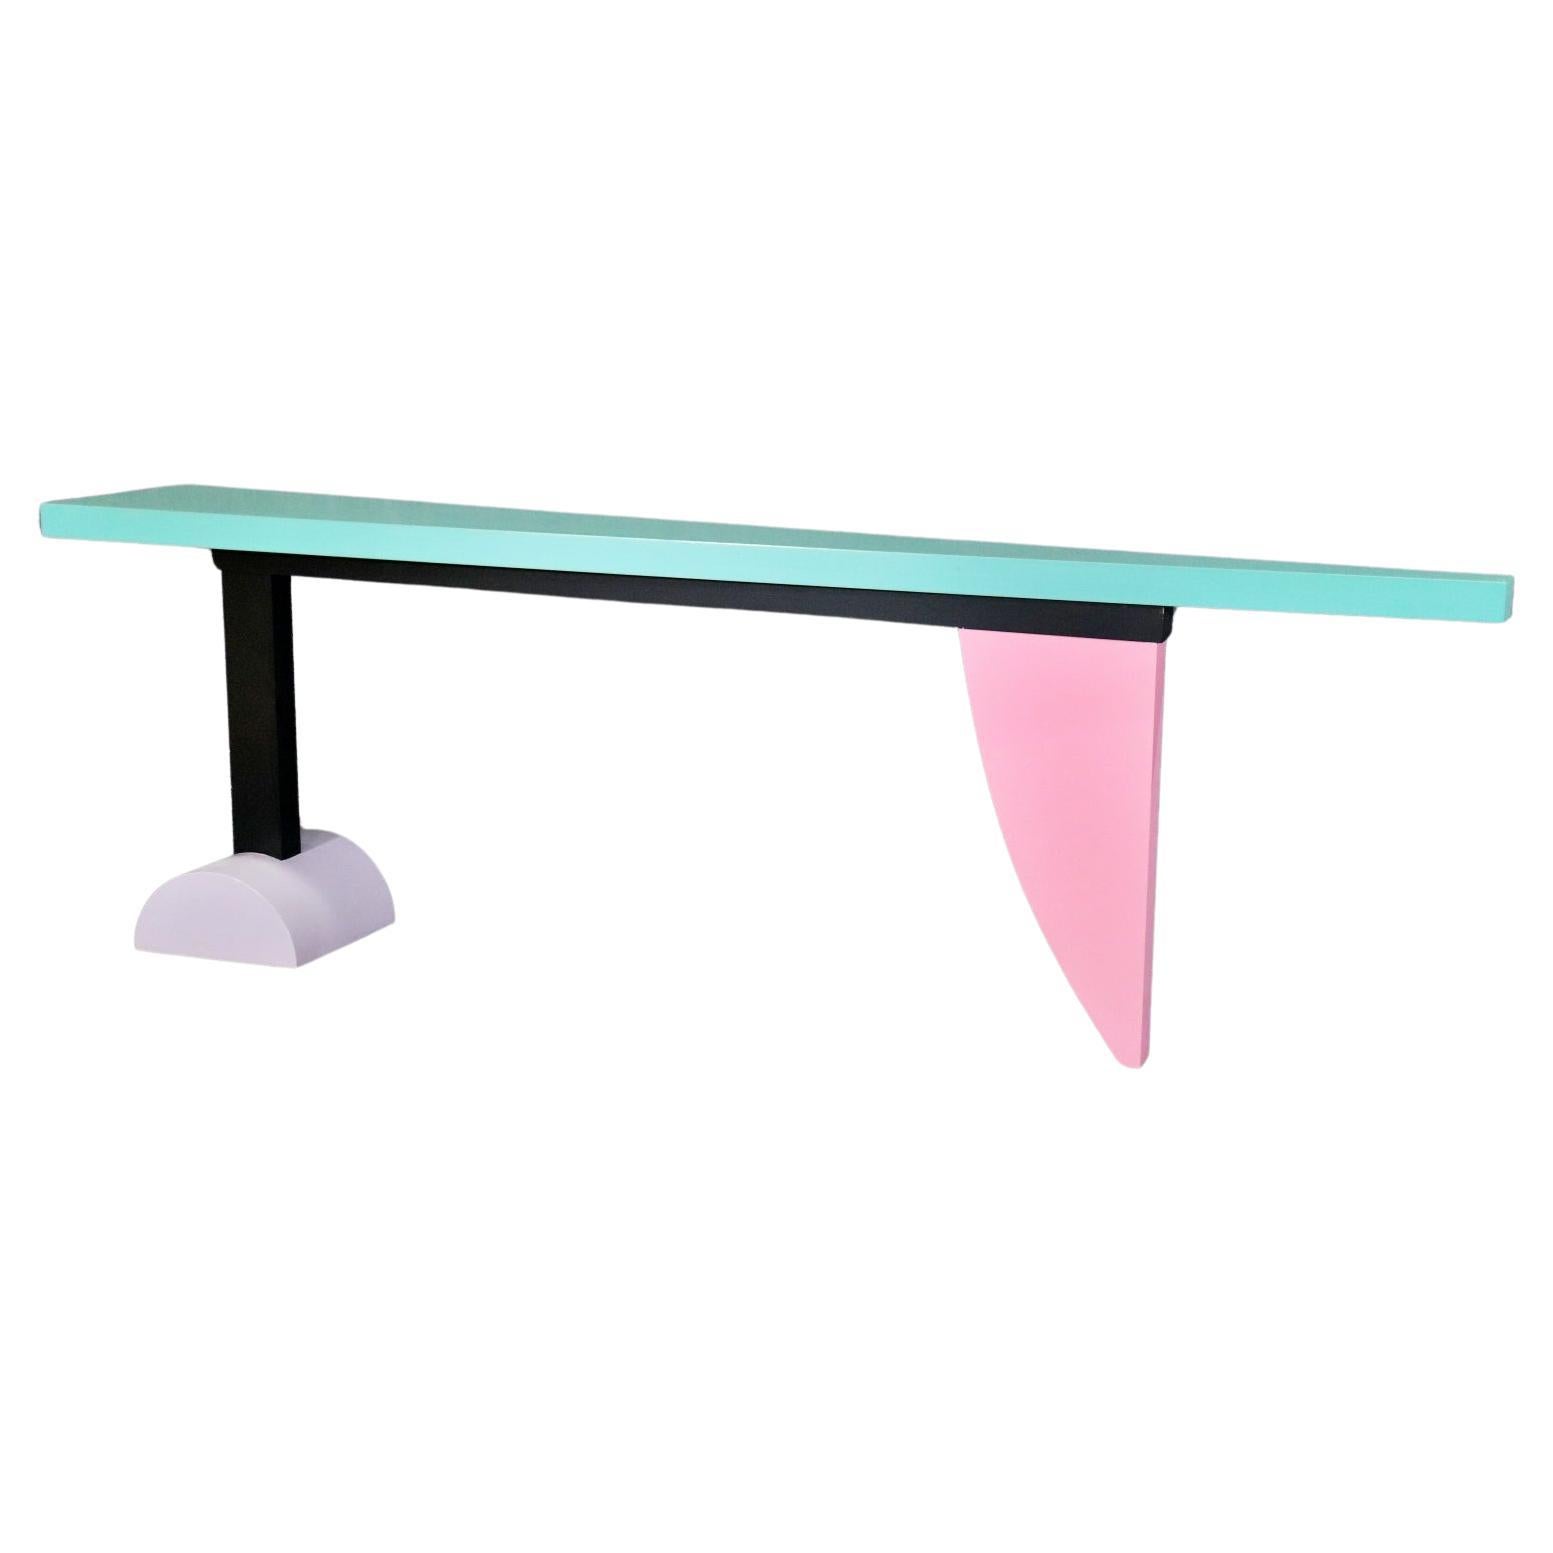 Memphis Style Polychromed painted Console Table Attributed to Peter Shire